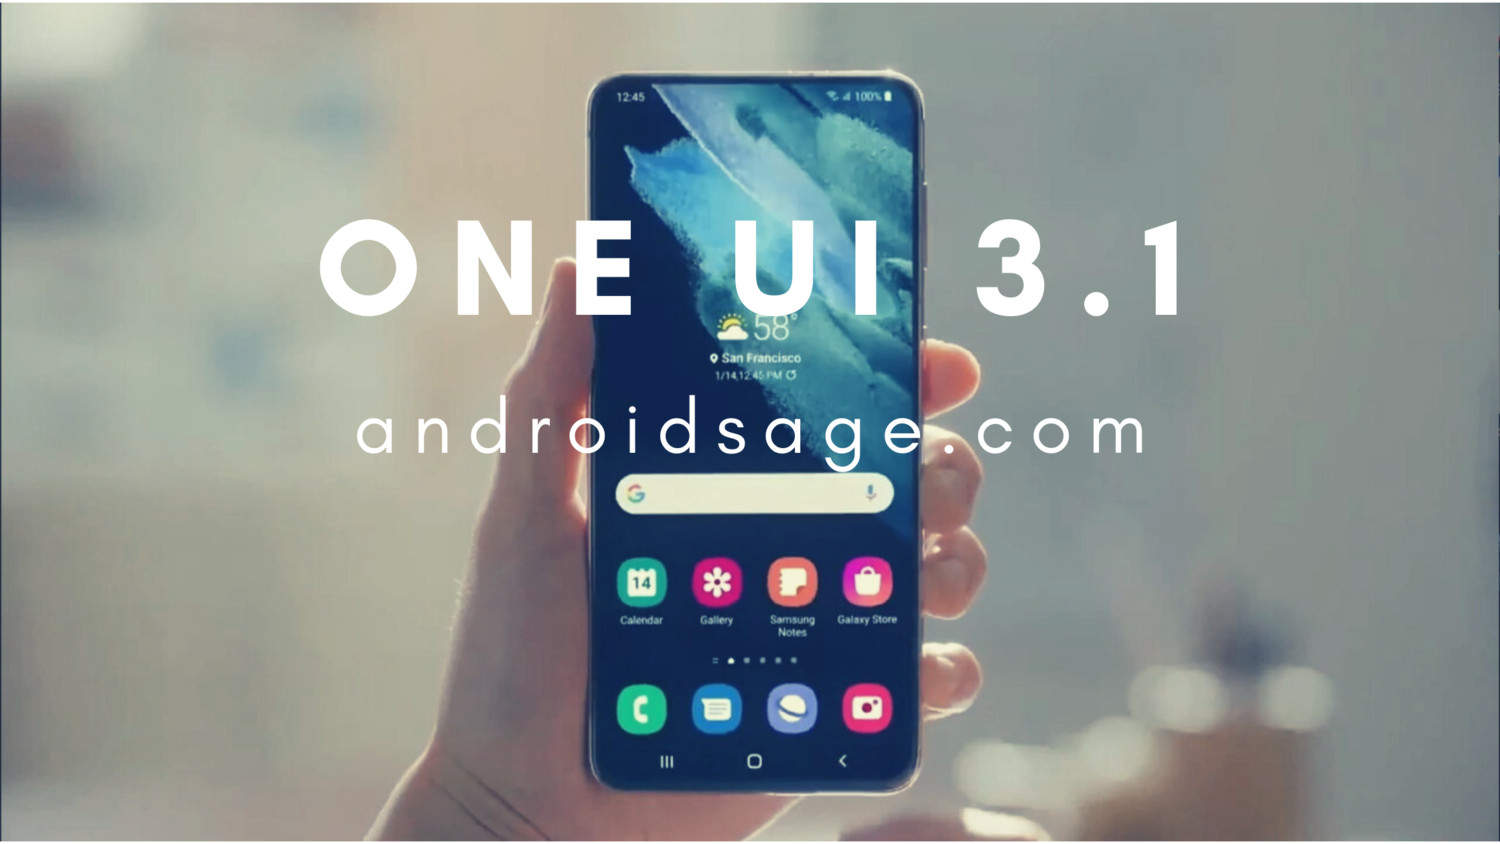 One UI 3.1 with Android 11 for Samsung Galaxy devices